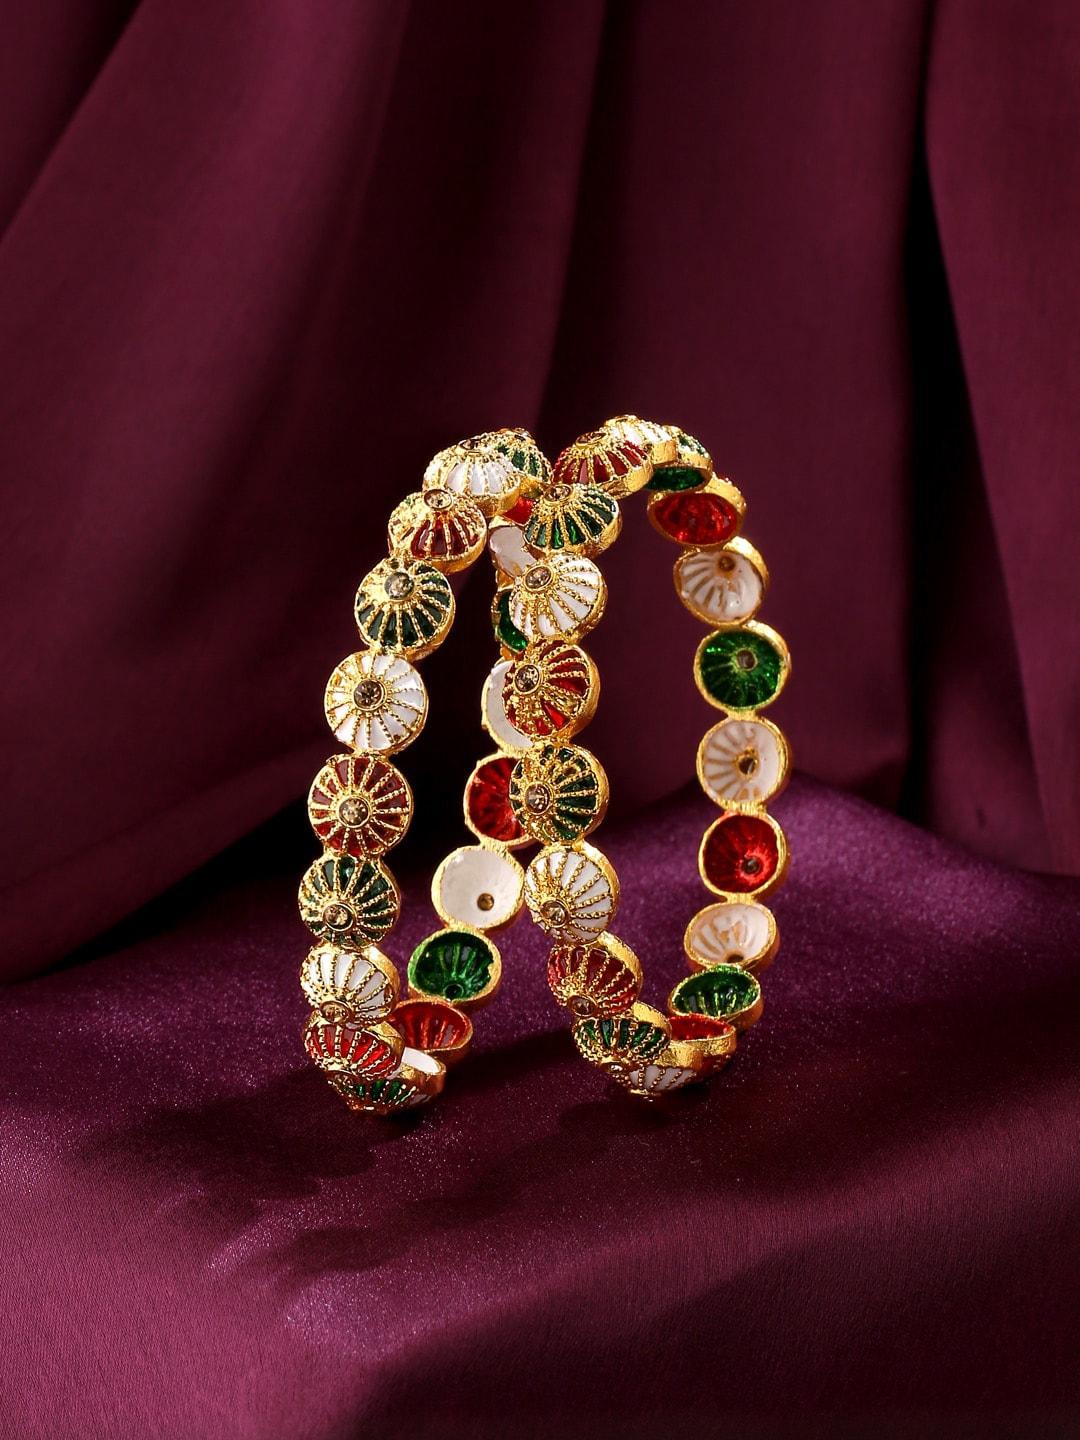 VIRAASI Women Set Of 2 Gold-Plated Red & Green Enameled Handcrafted Bangle